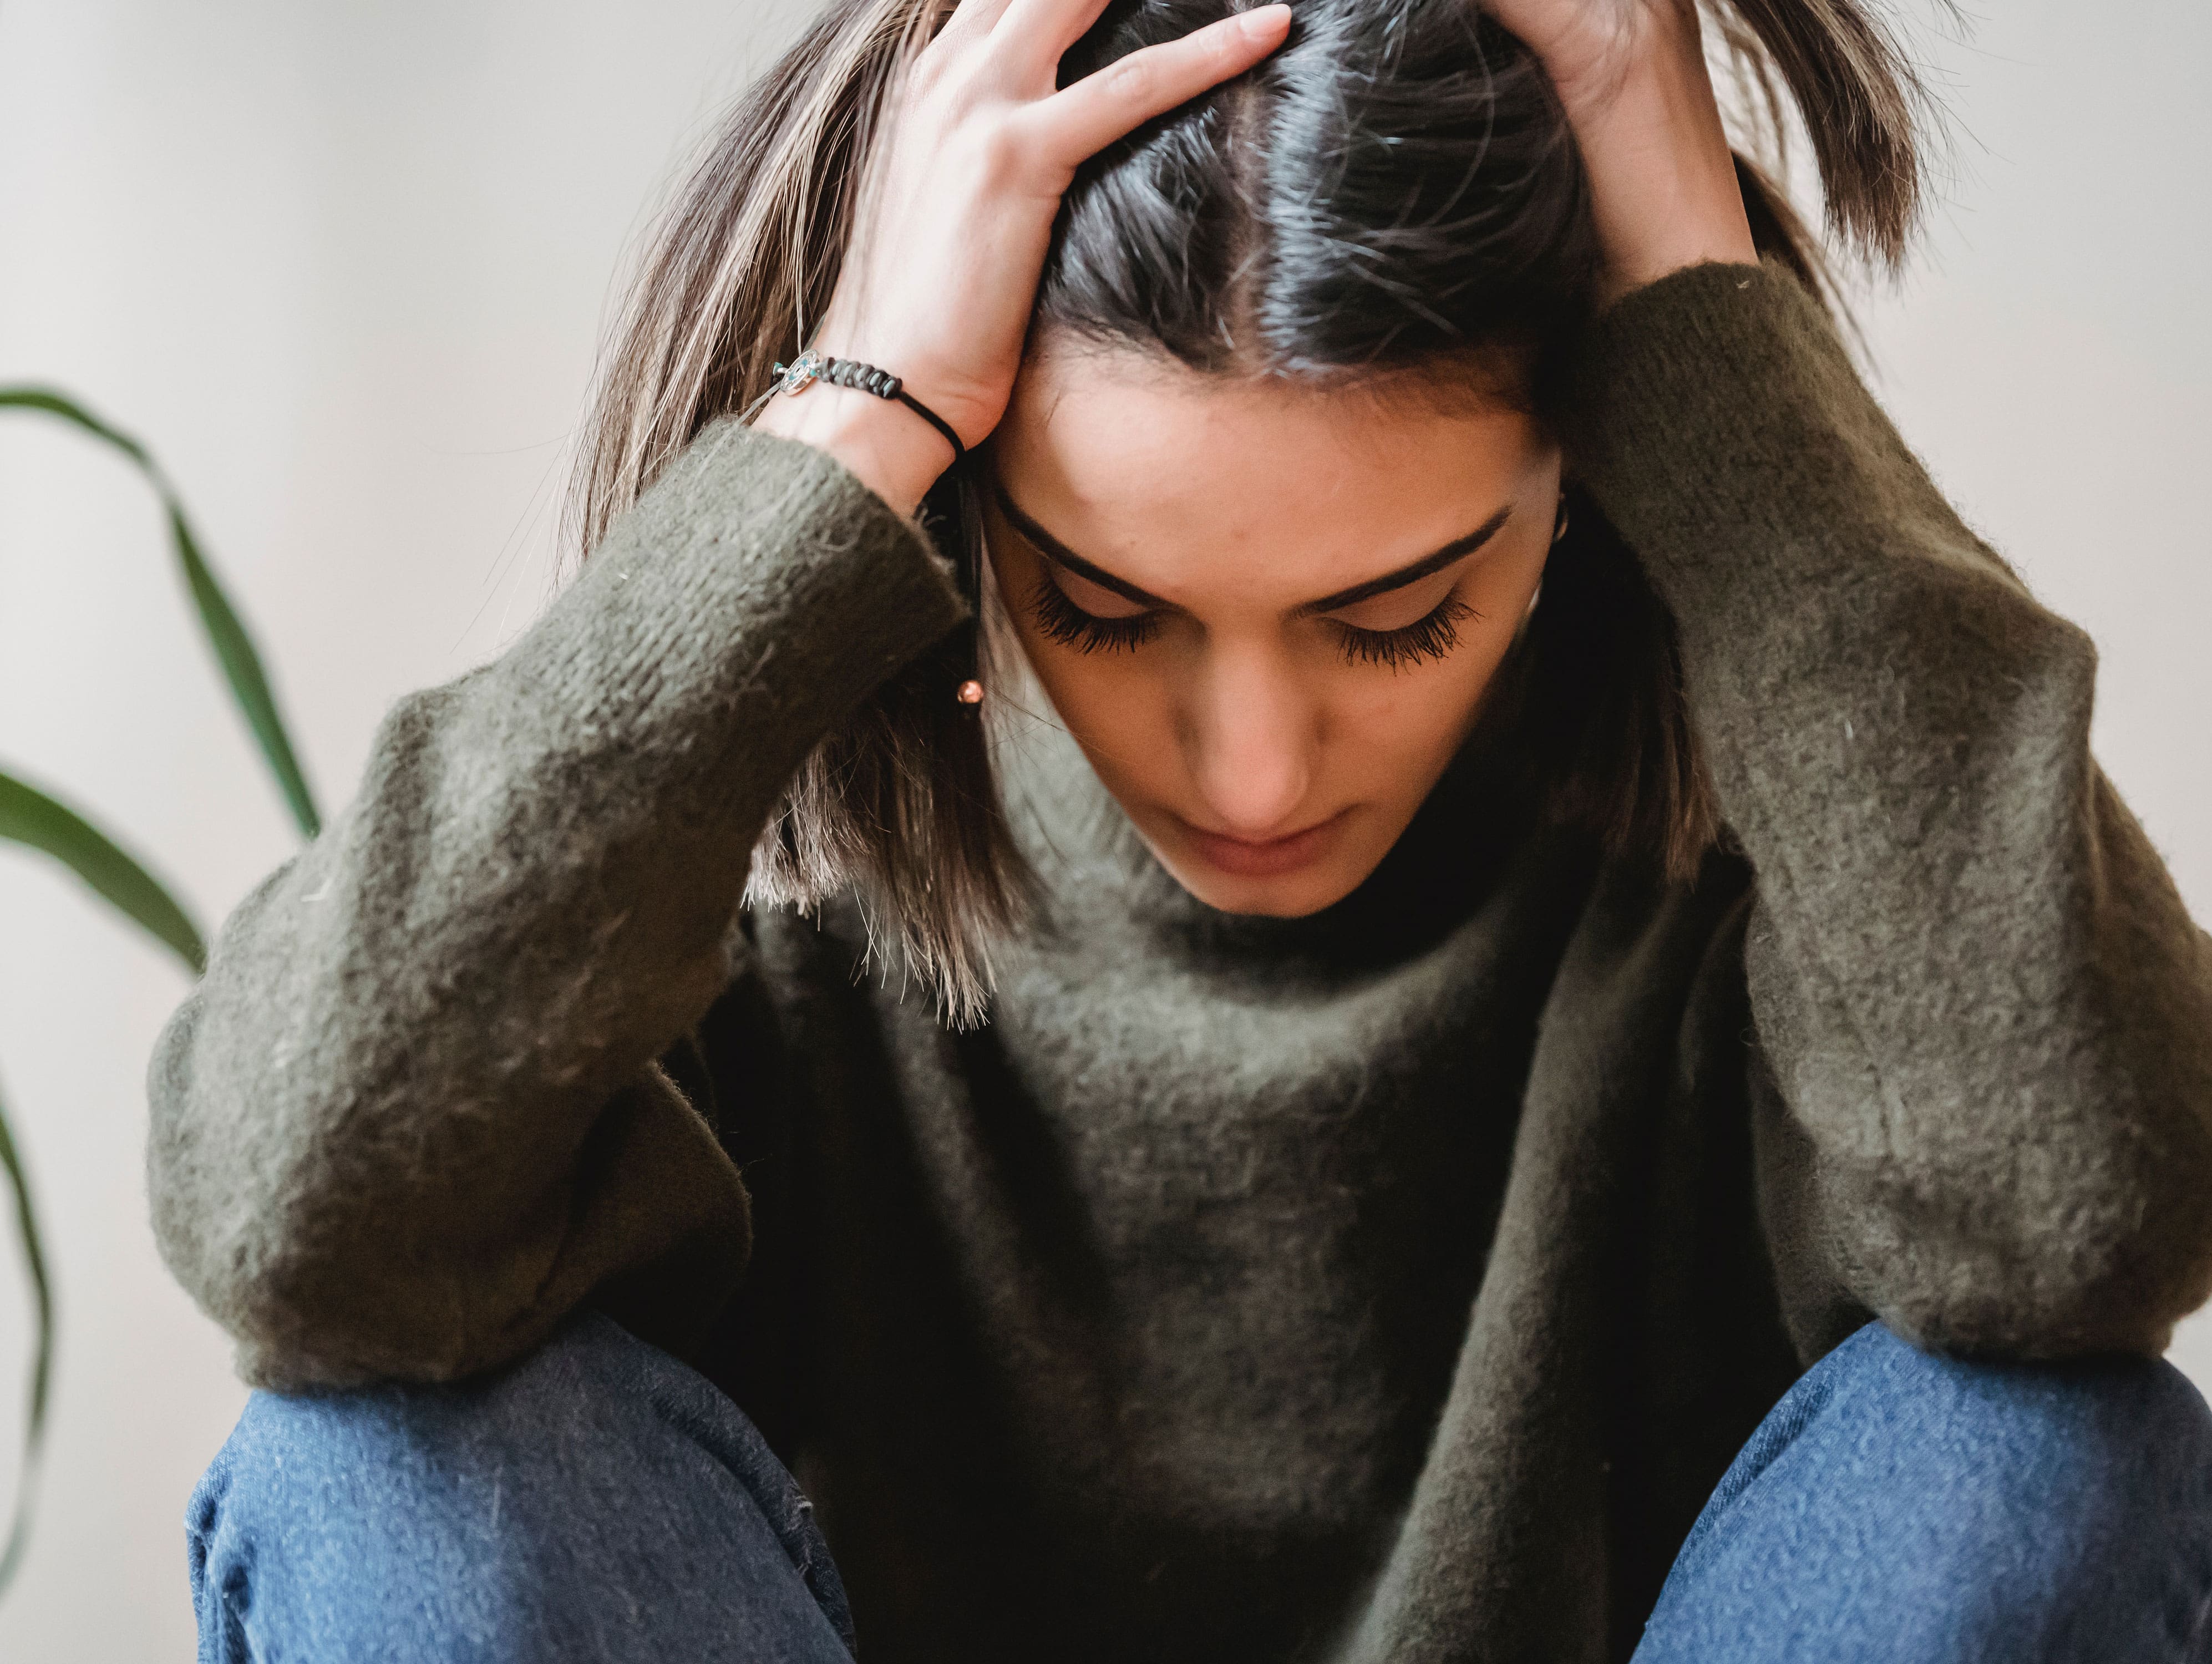 Image credits: https://www.pexels.com/photo/depressed-young-ethnic-lady-touching-head-and-looking-down-sitting-near-wall-6382648/